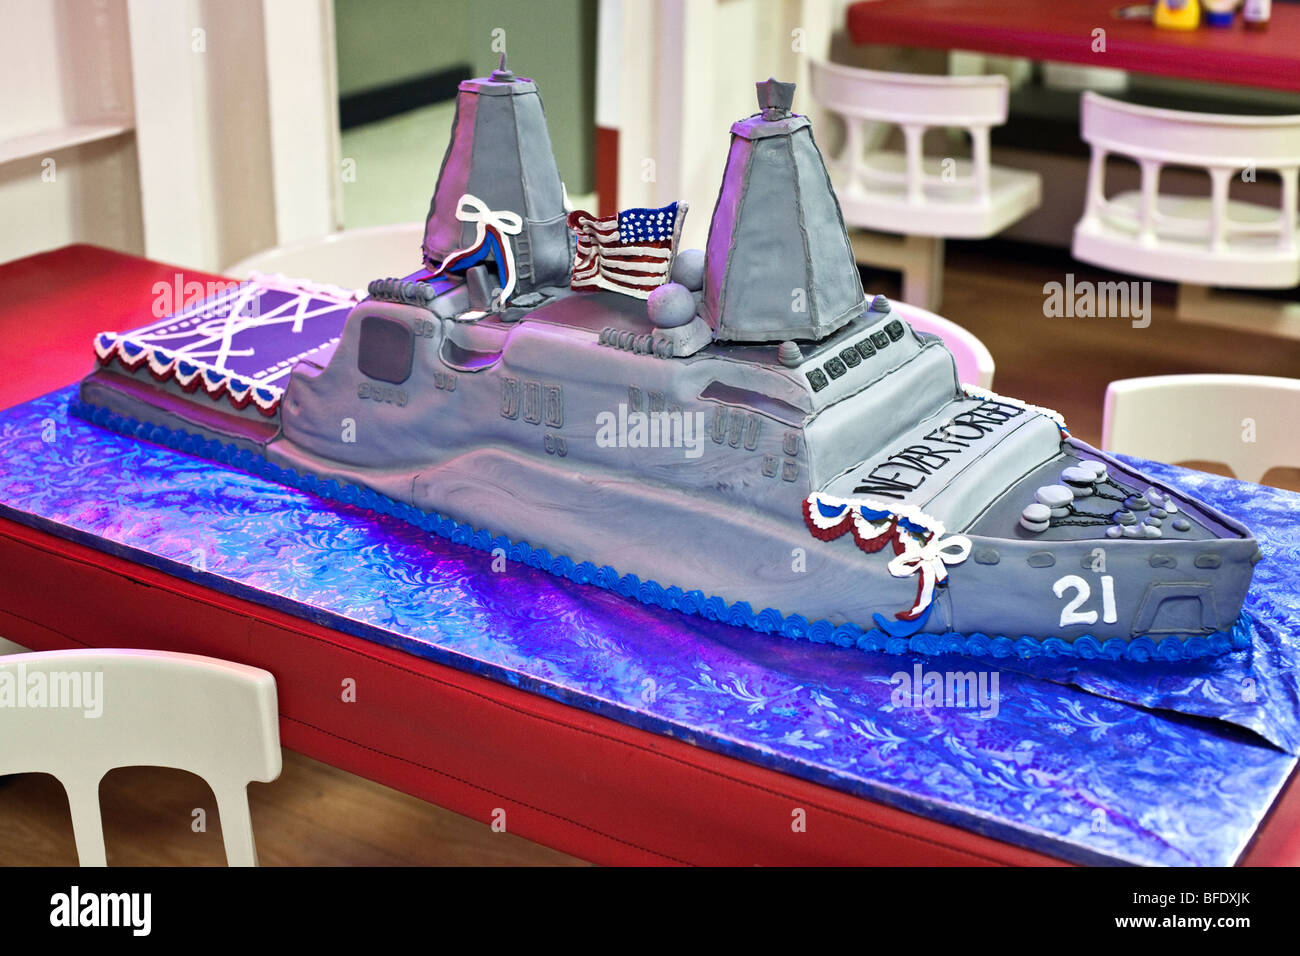 whimsical cake replica of USS New York iced in battleship gray baked by a crew member & proudly displayed in the enlisted mess Stock Photo